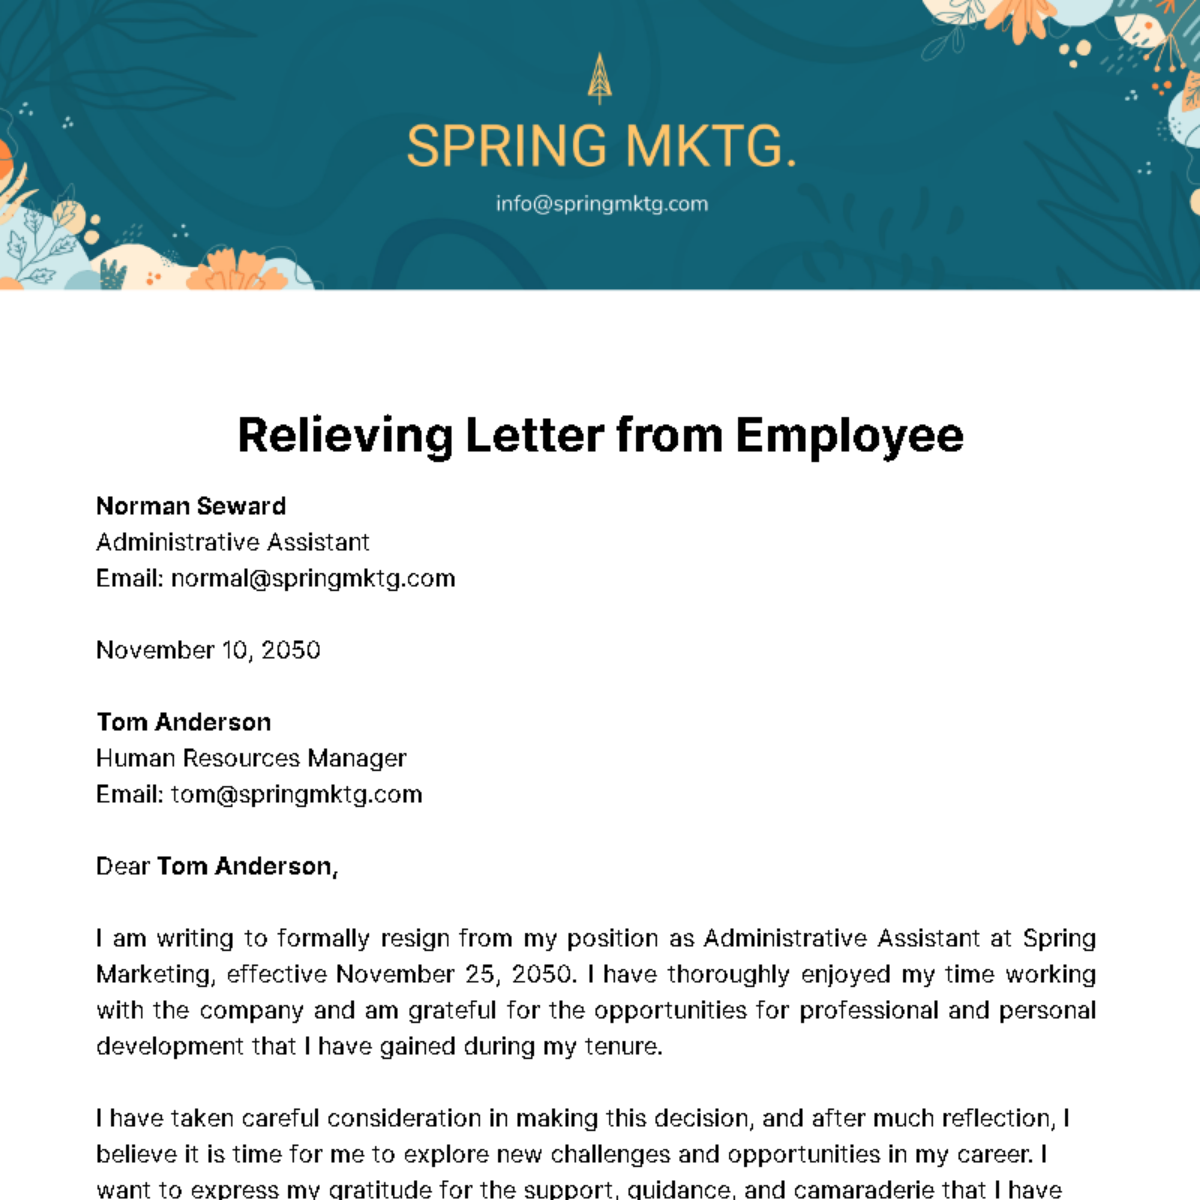 Relieving Letter from Employee Template